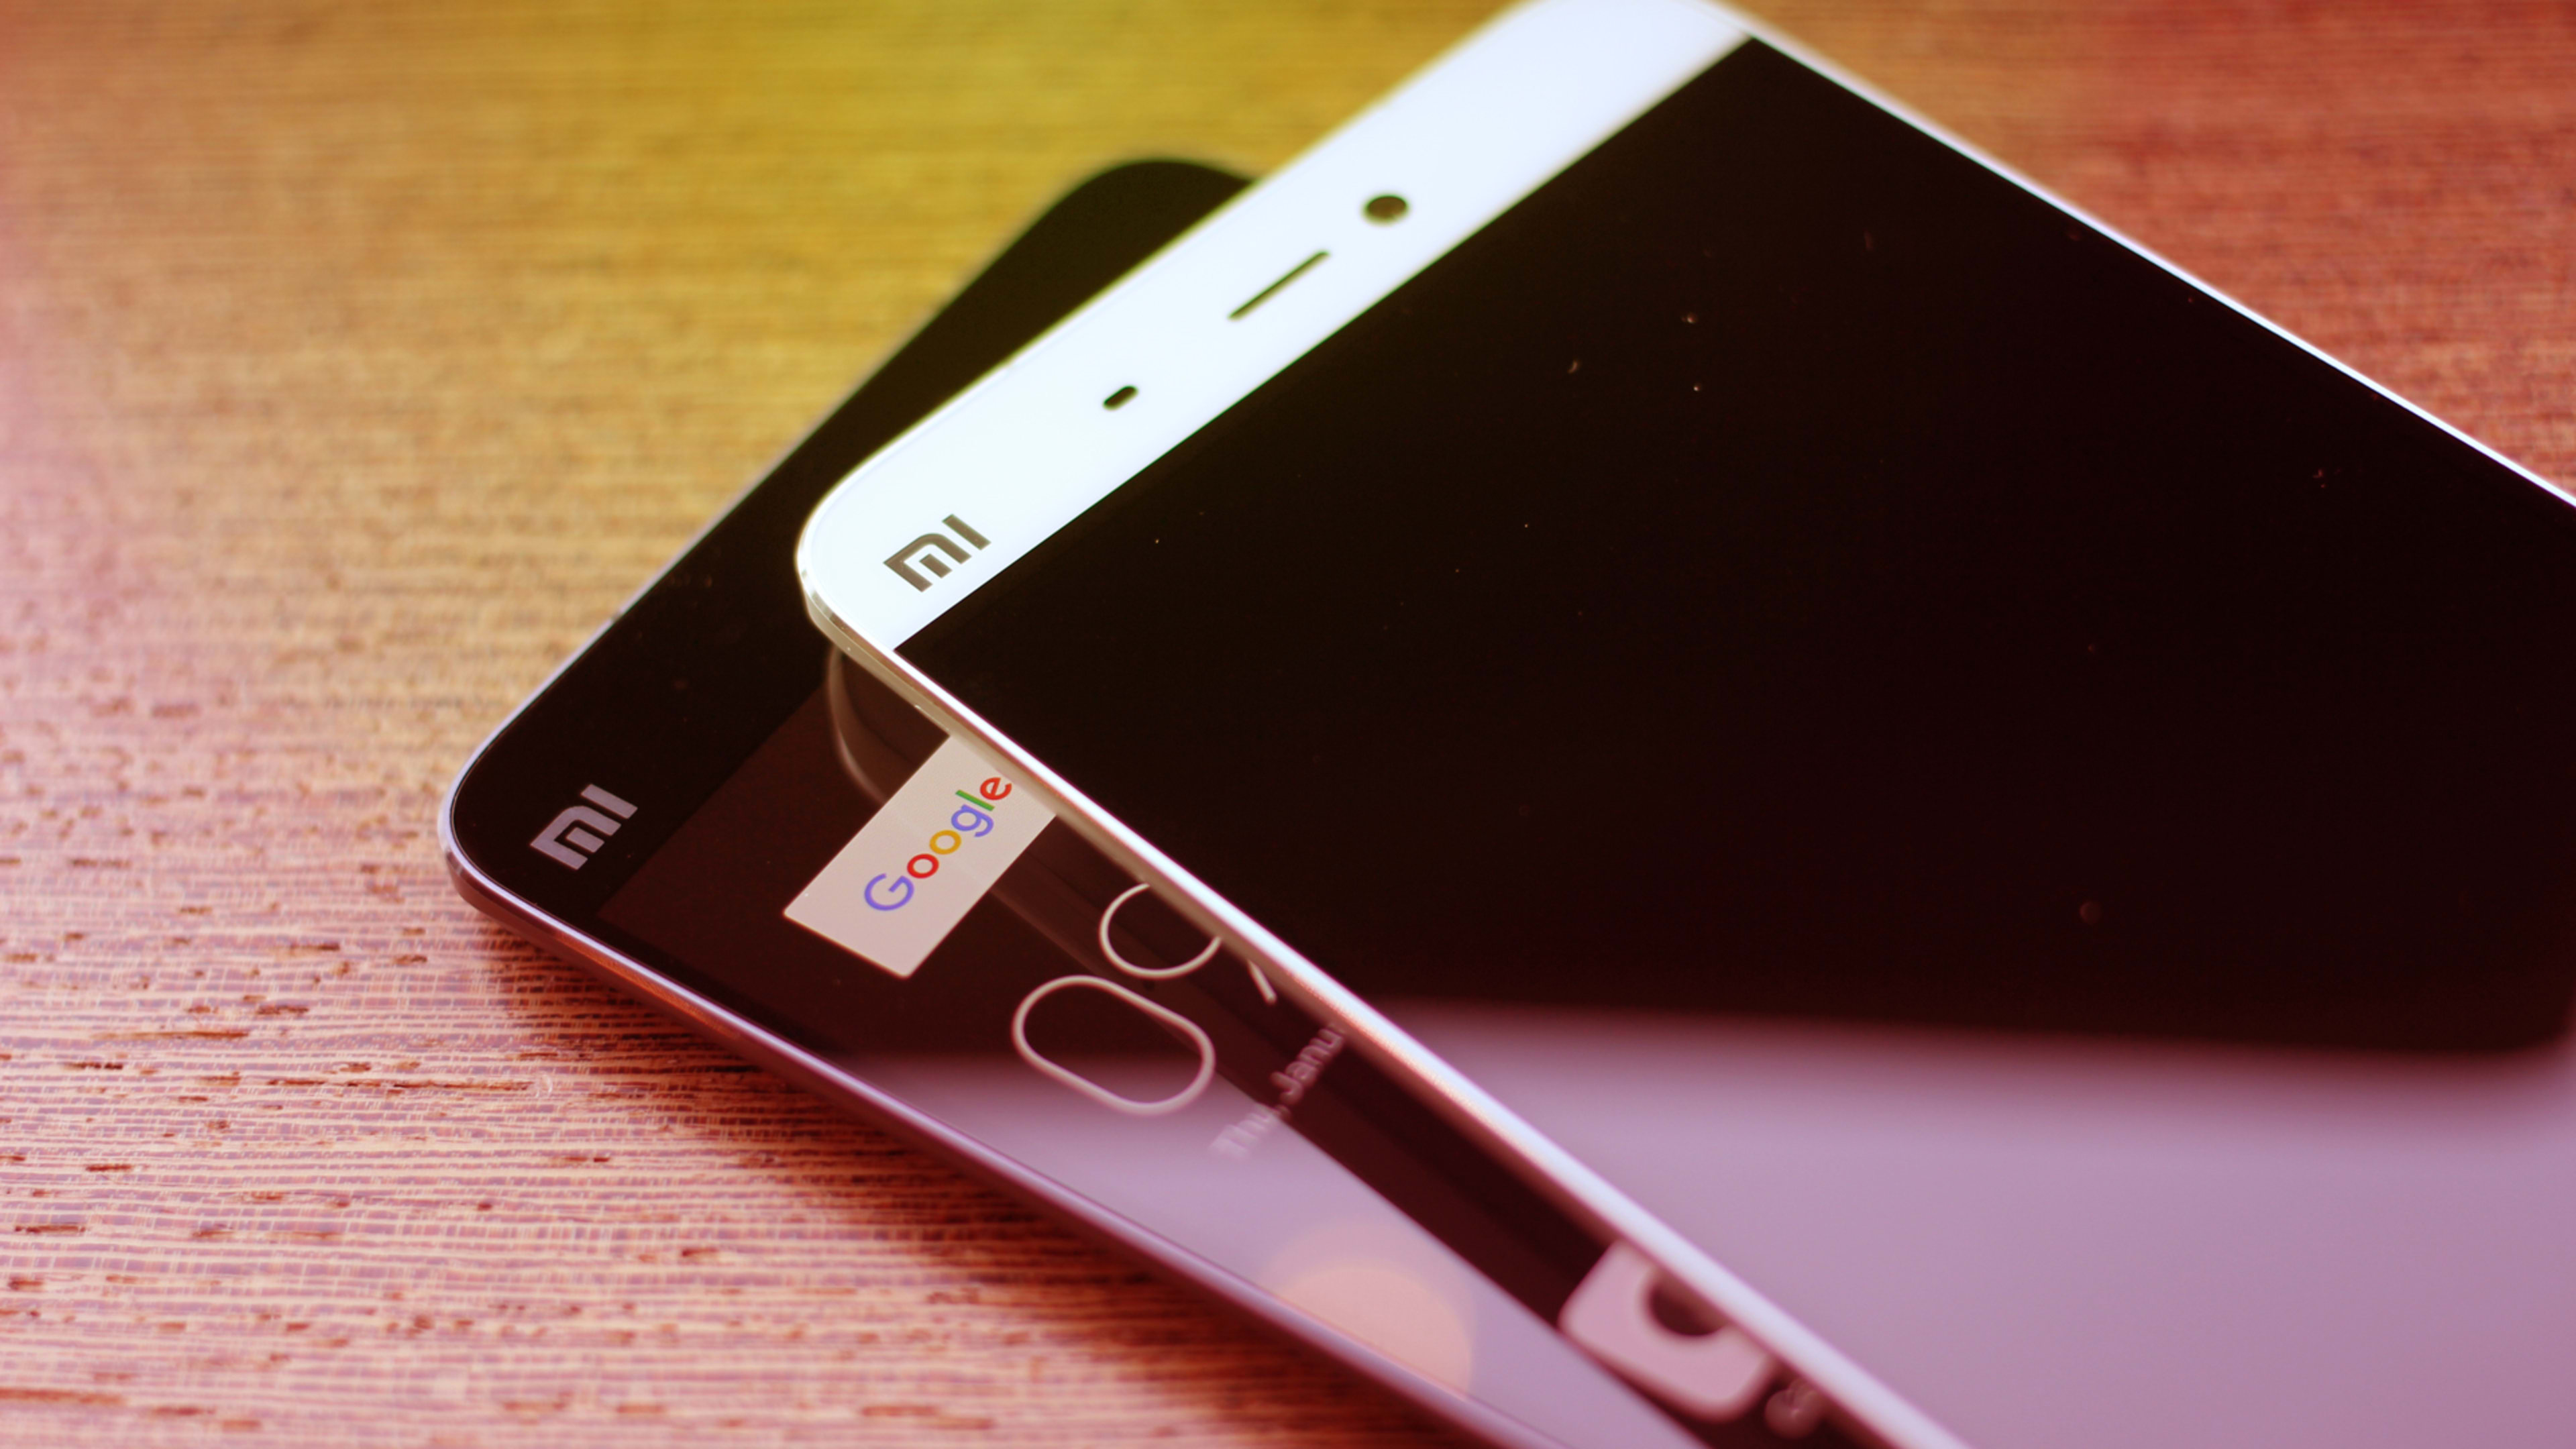 Xiaomi has filed for its much-anticipated IPO